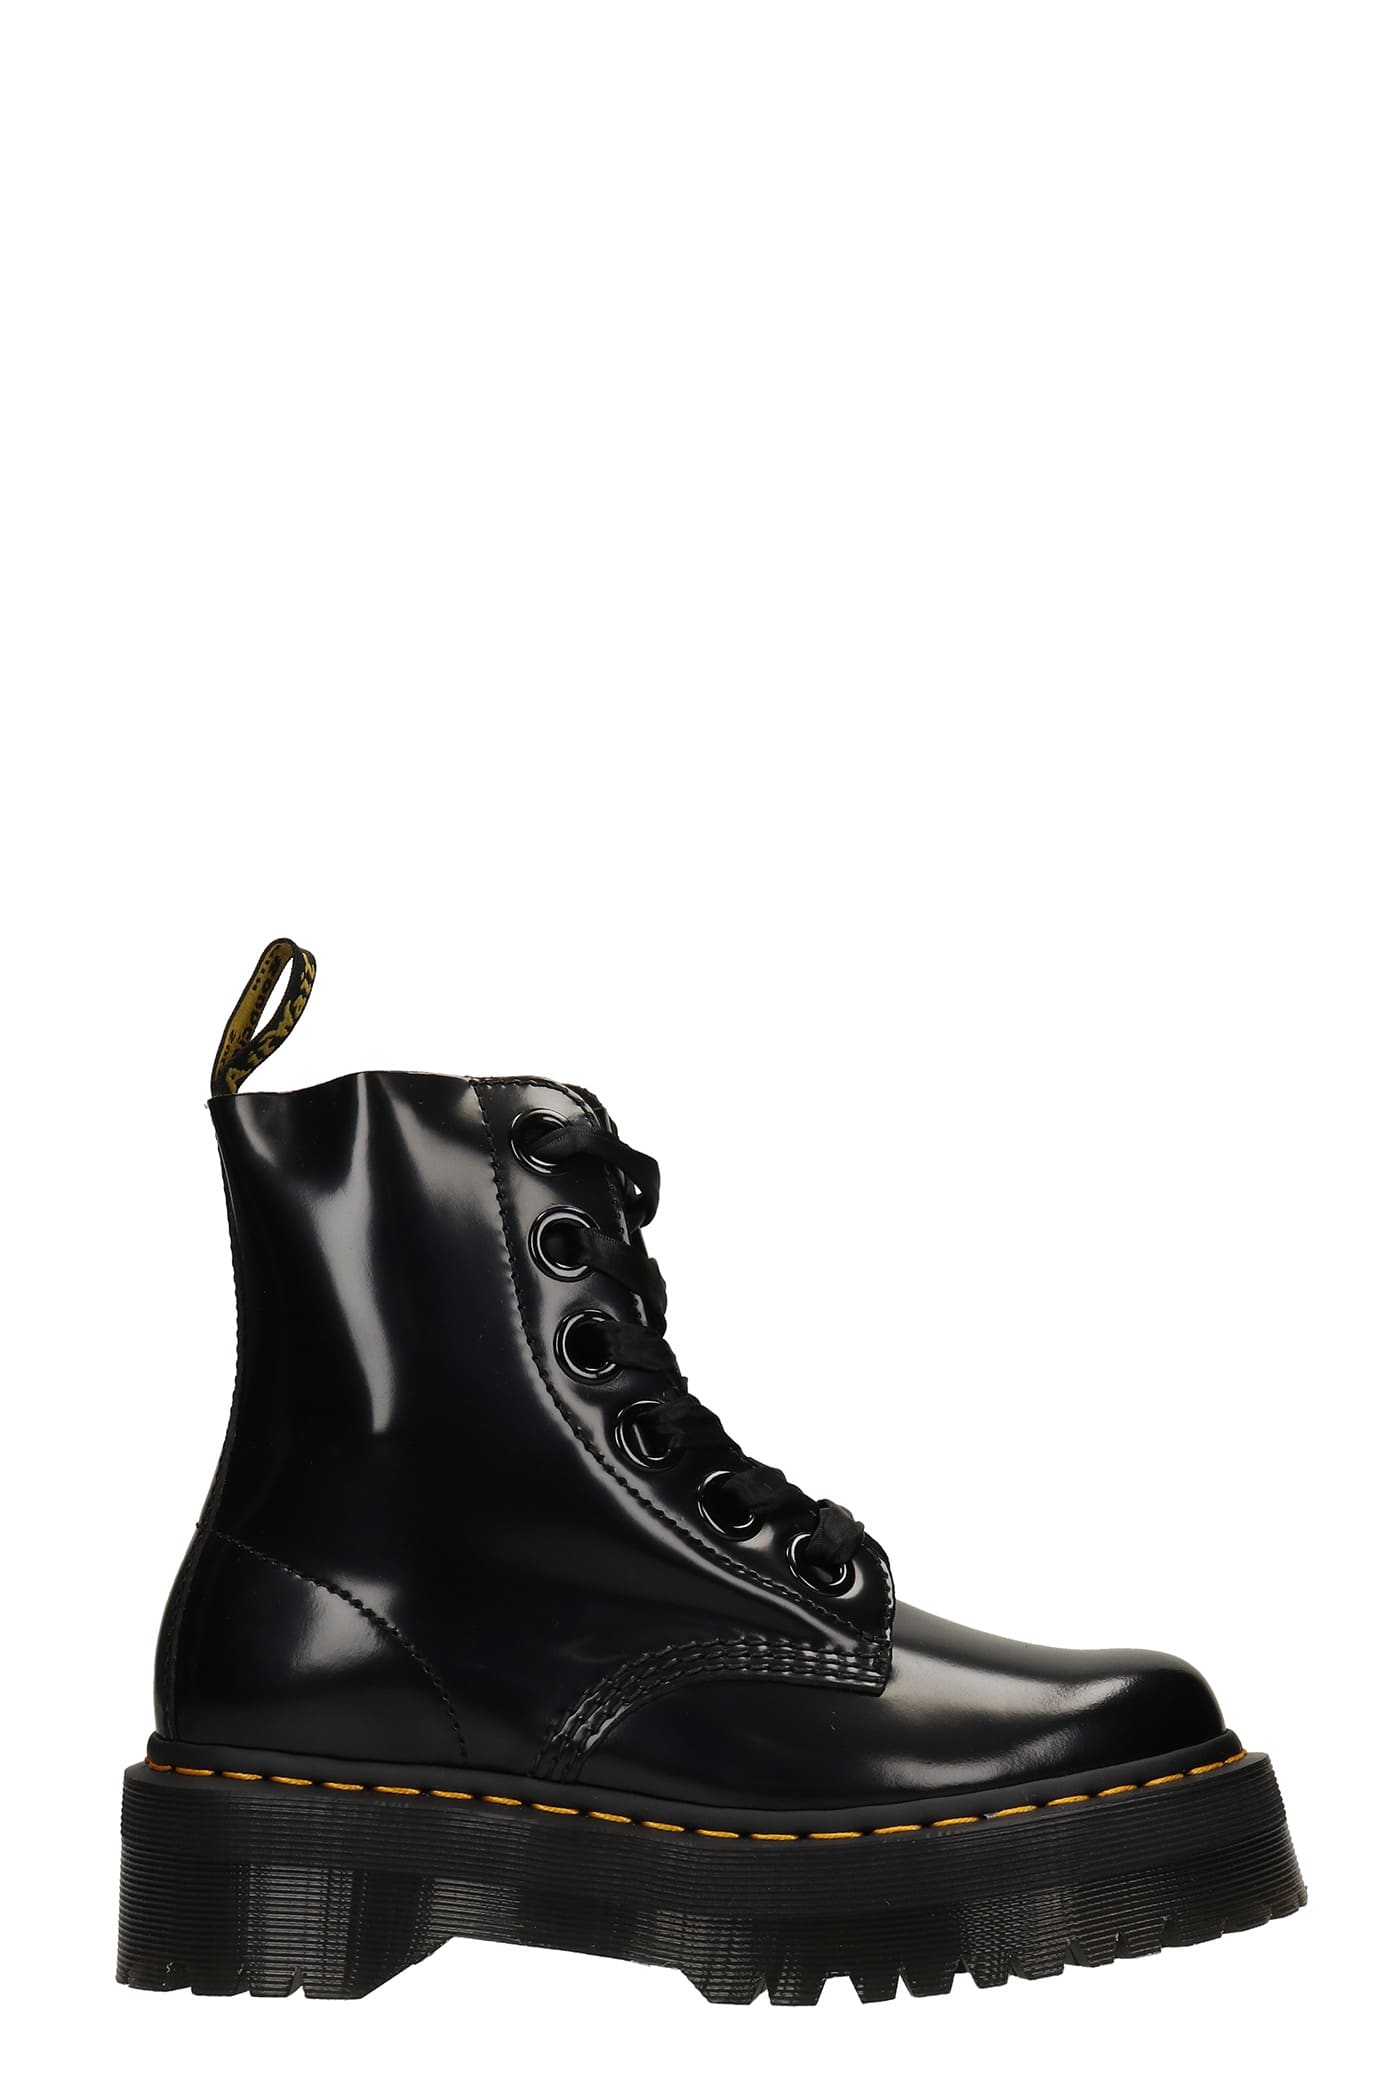 Dr. Martens Molly Combat Boots In Black Leather